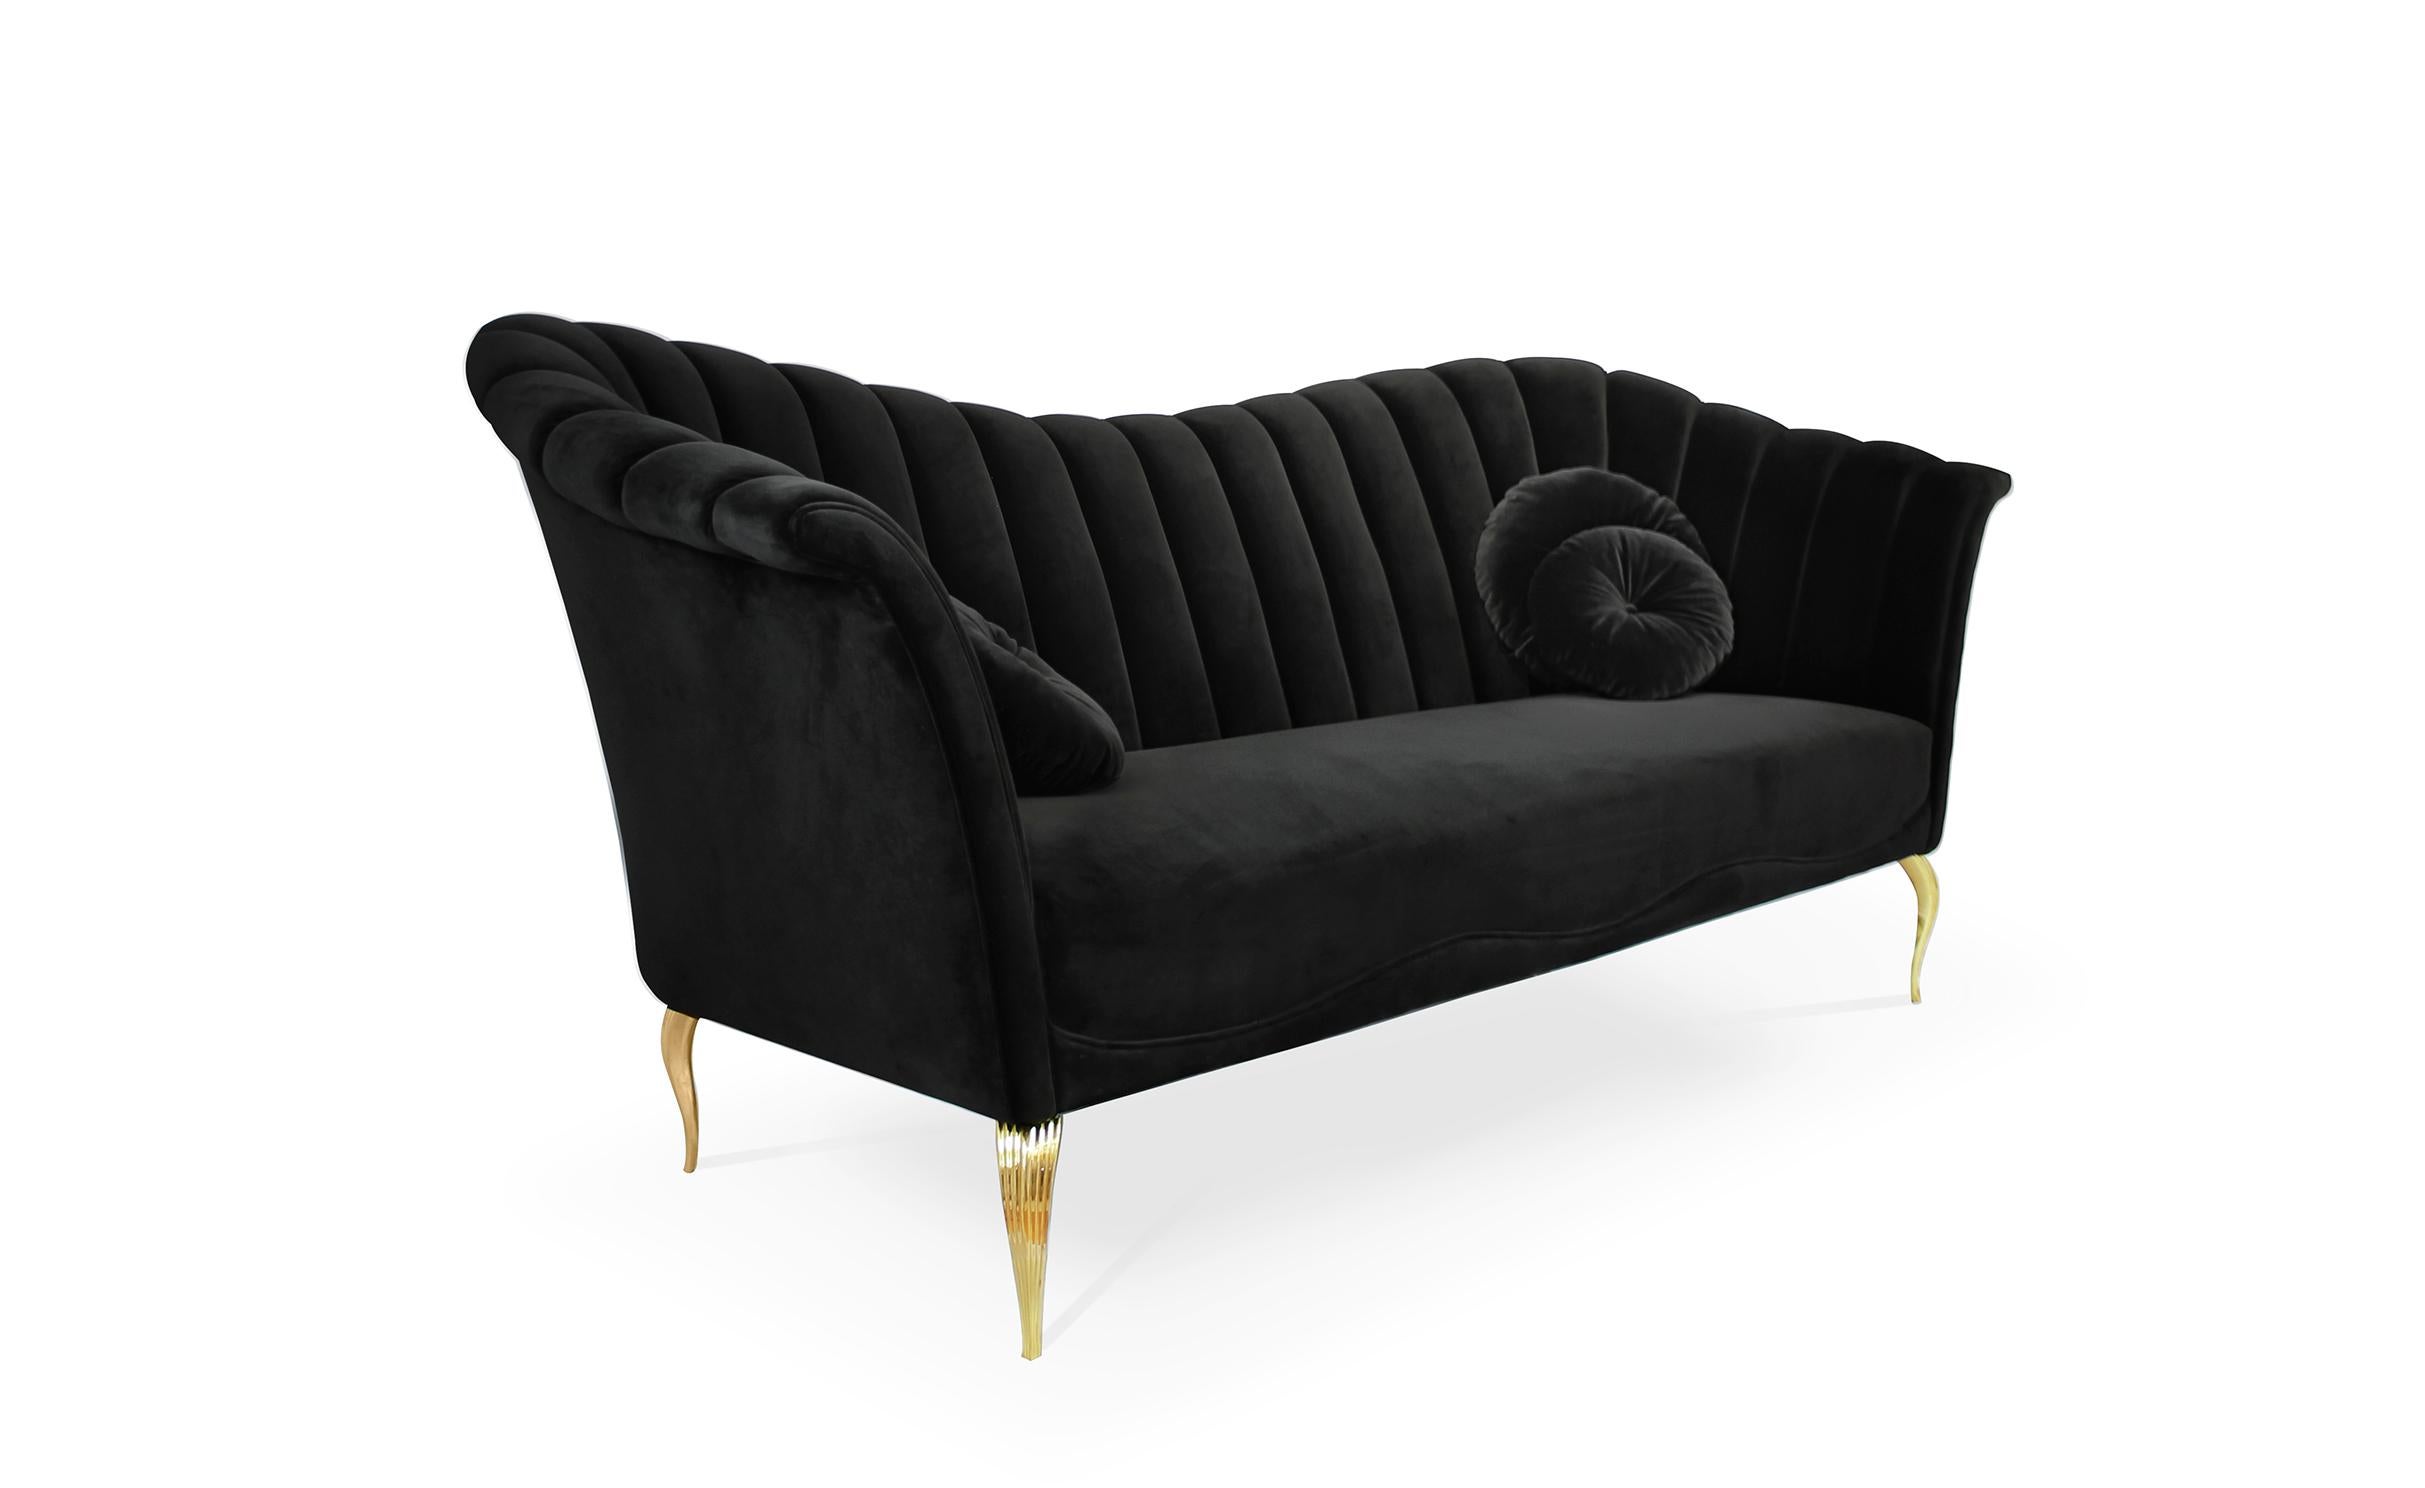 Flirty and unpredictable like a modern woman, the Caprichosa’s voluptuous sofa design mimics a woman’s most desirable curves. Fitted like a little black dress in delicious upholstery fabric and resting on dainty brass feet.

Options
Upholstery: